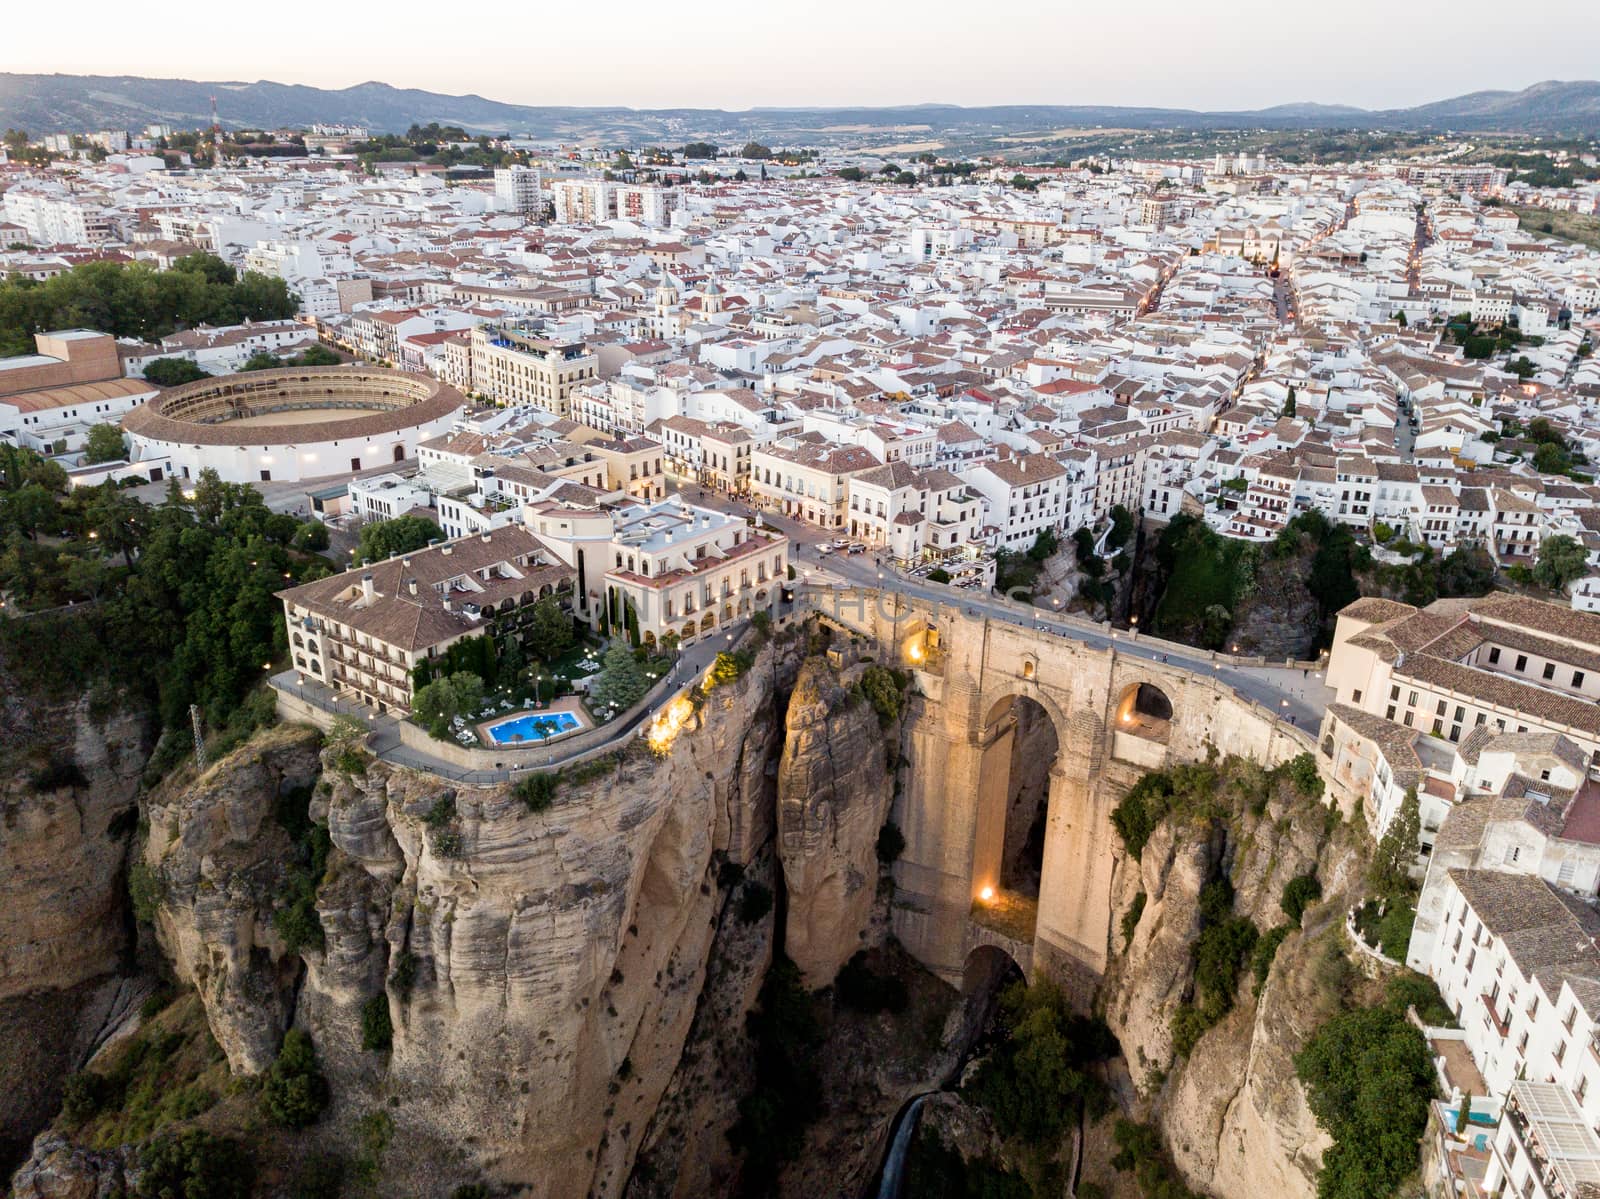 Ronda, Spain - May 31, 2019: Aerial Drone view of the famous bridge Puente Nuevo in the historic city centre.